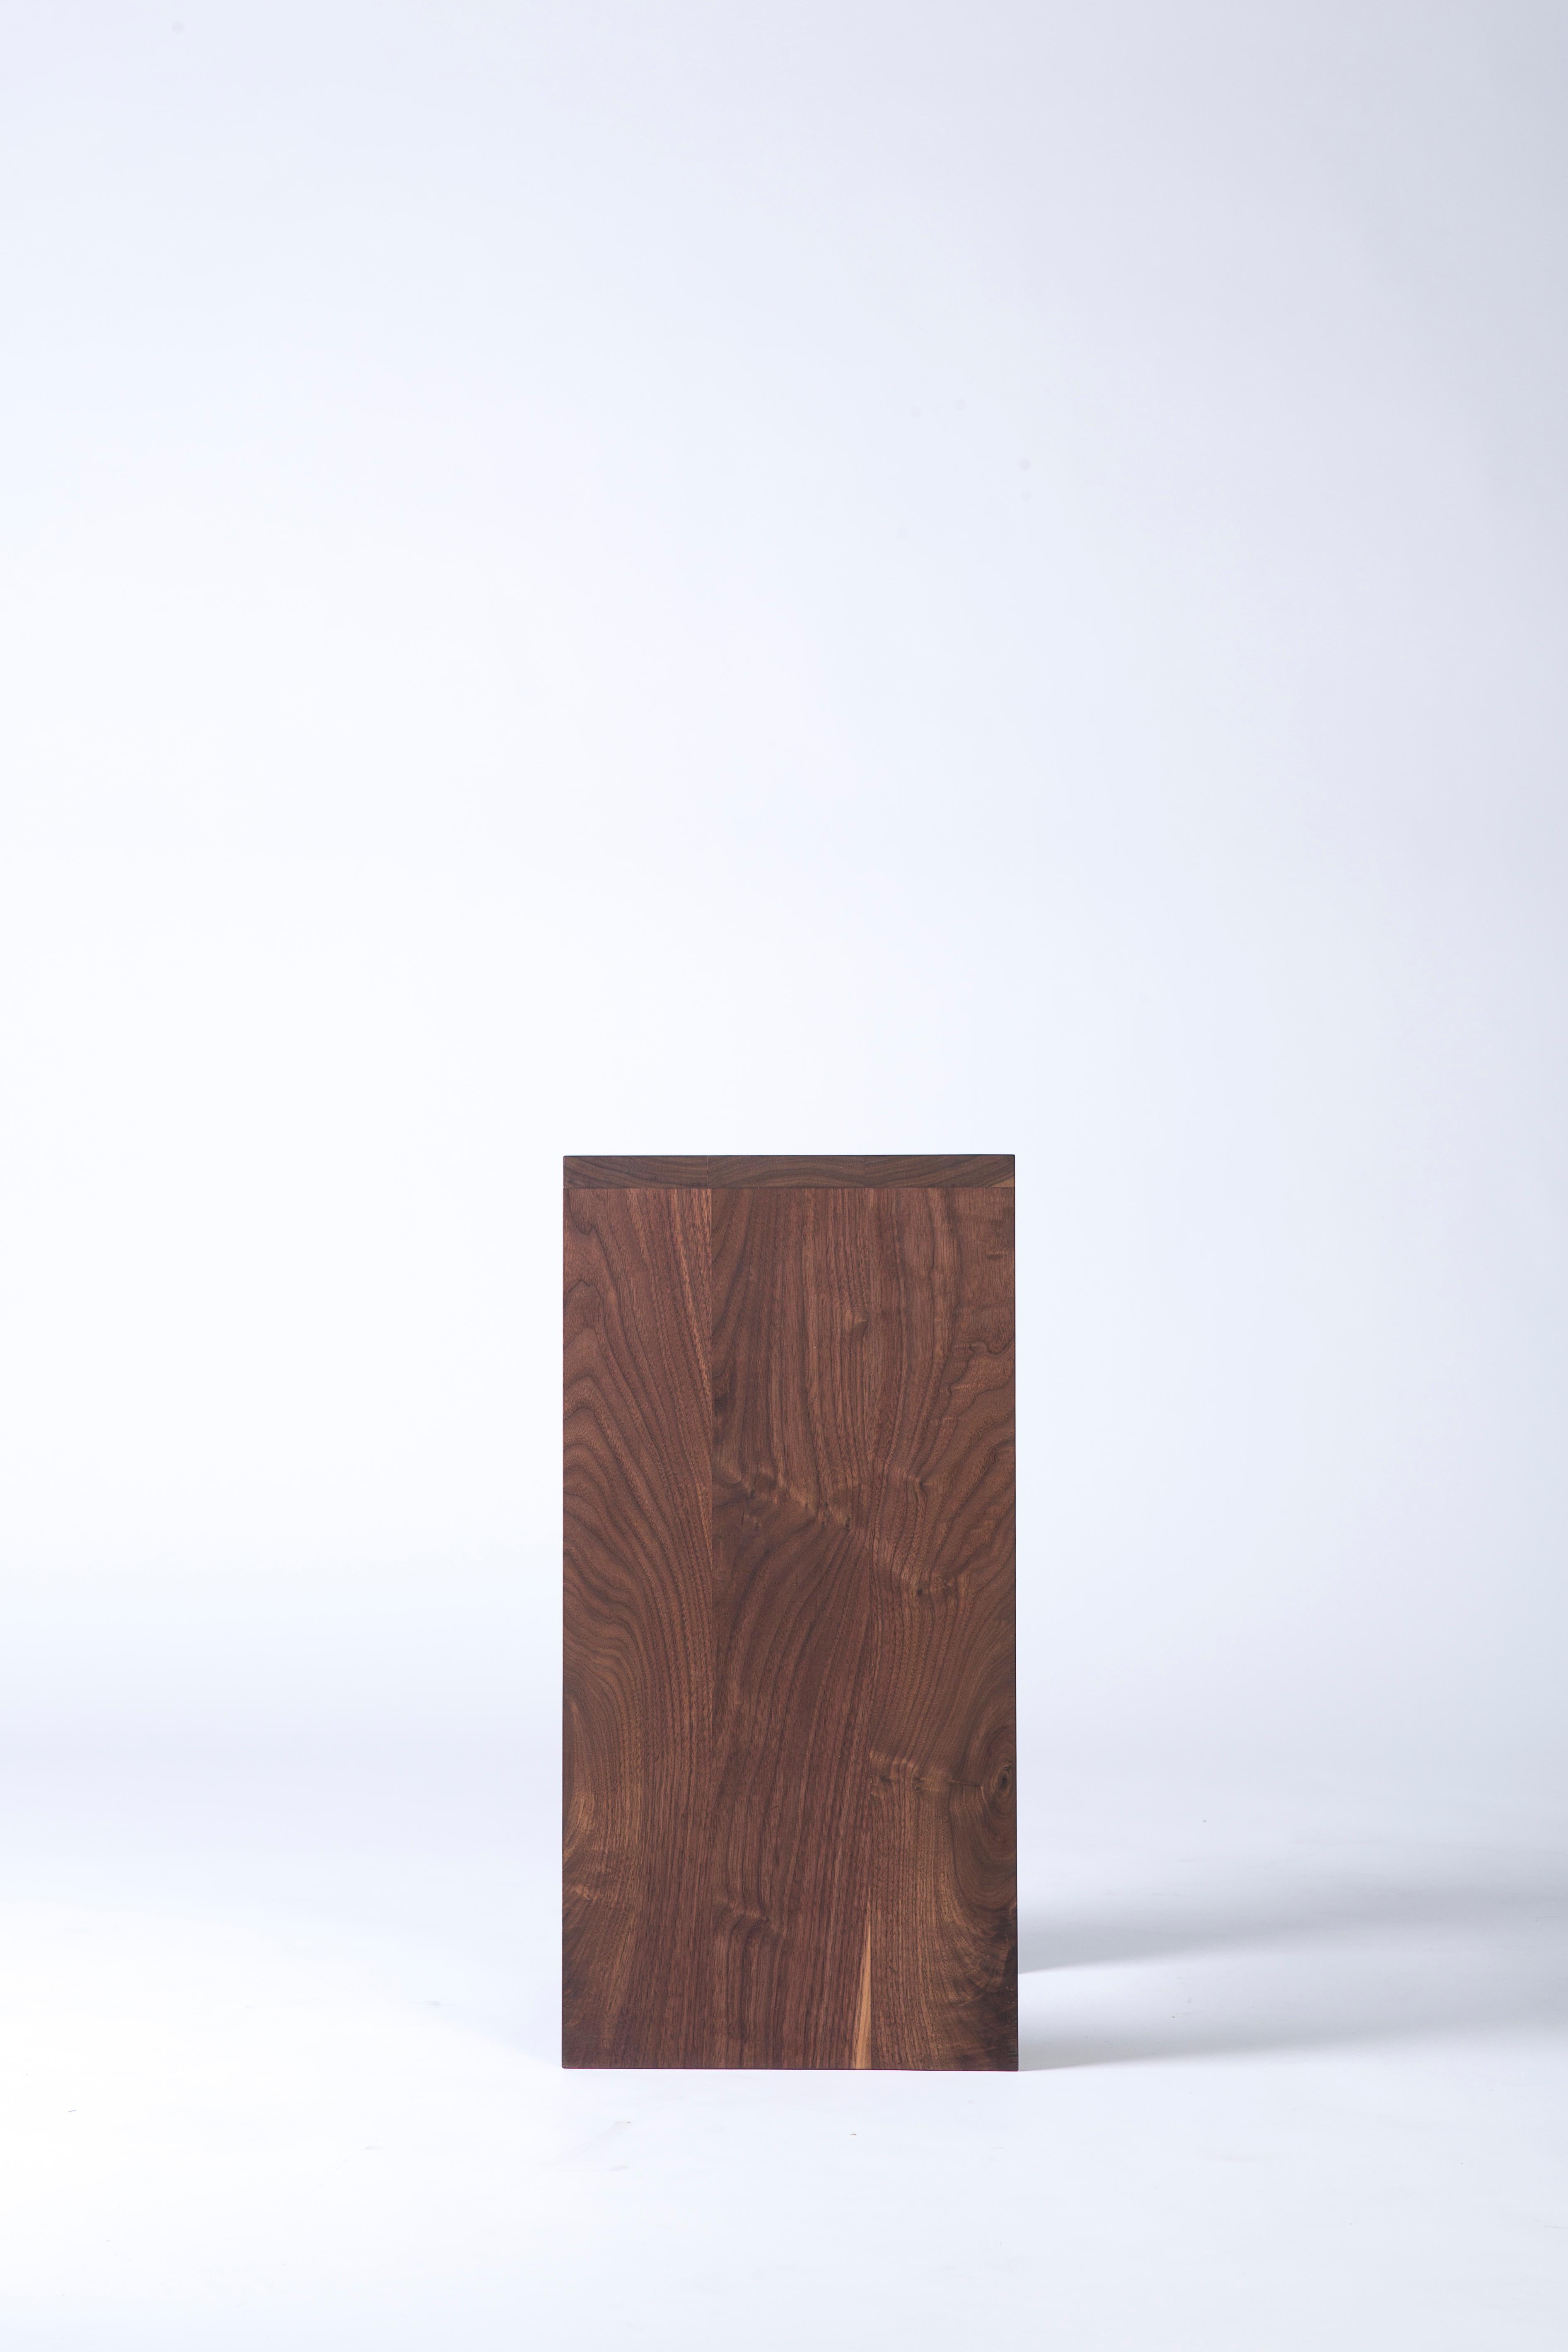 American Solid Walnut Stool with Multi-Purpose Sub-Surface Trough For Sale